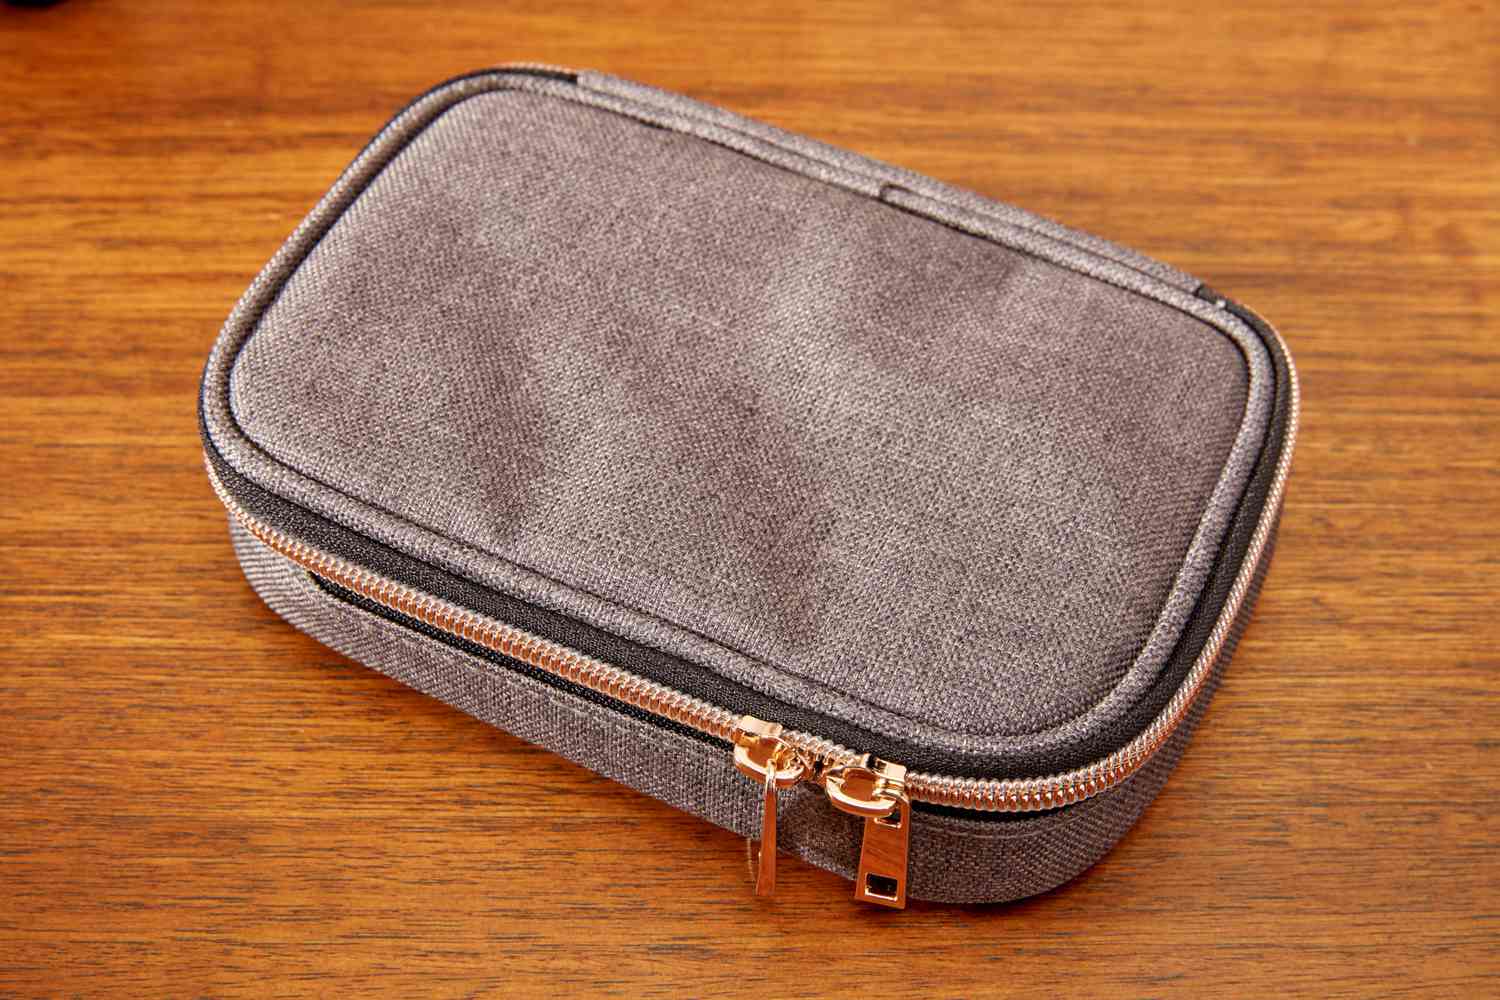 The Teamoy Small Jewelry Travel Case zipped closed